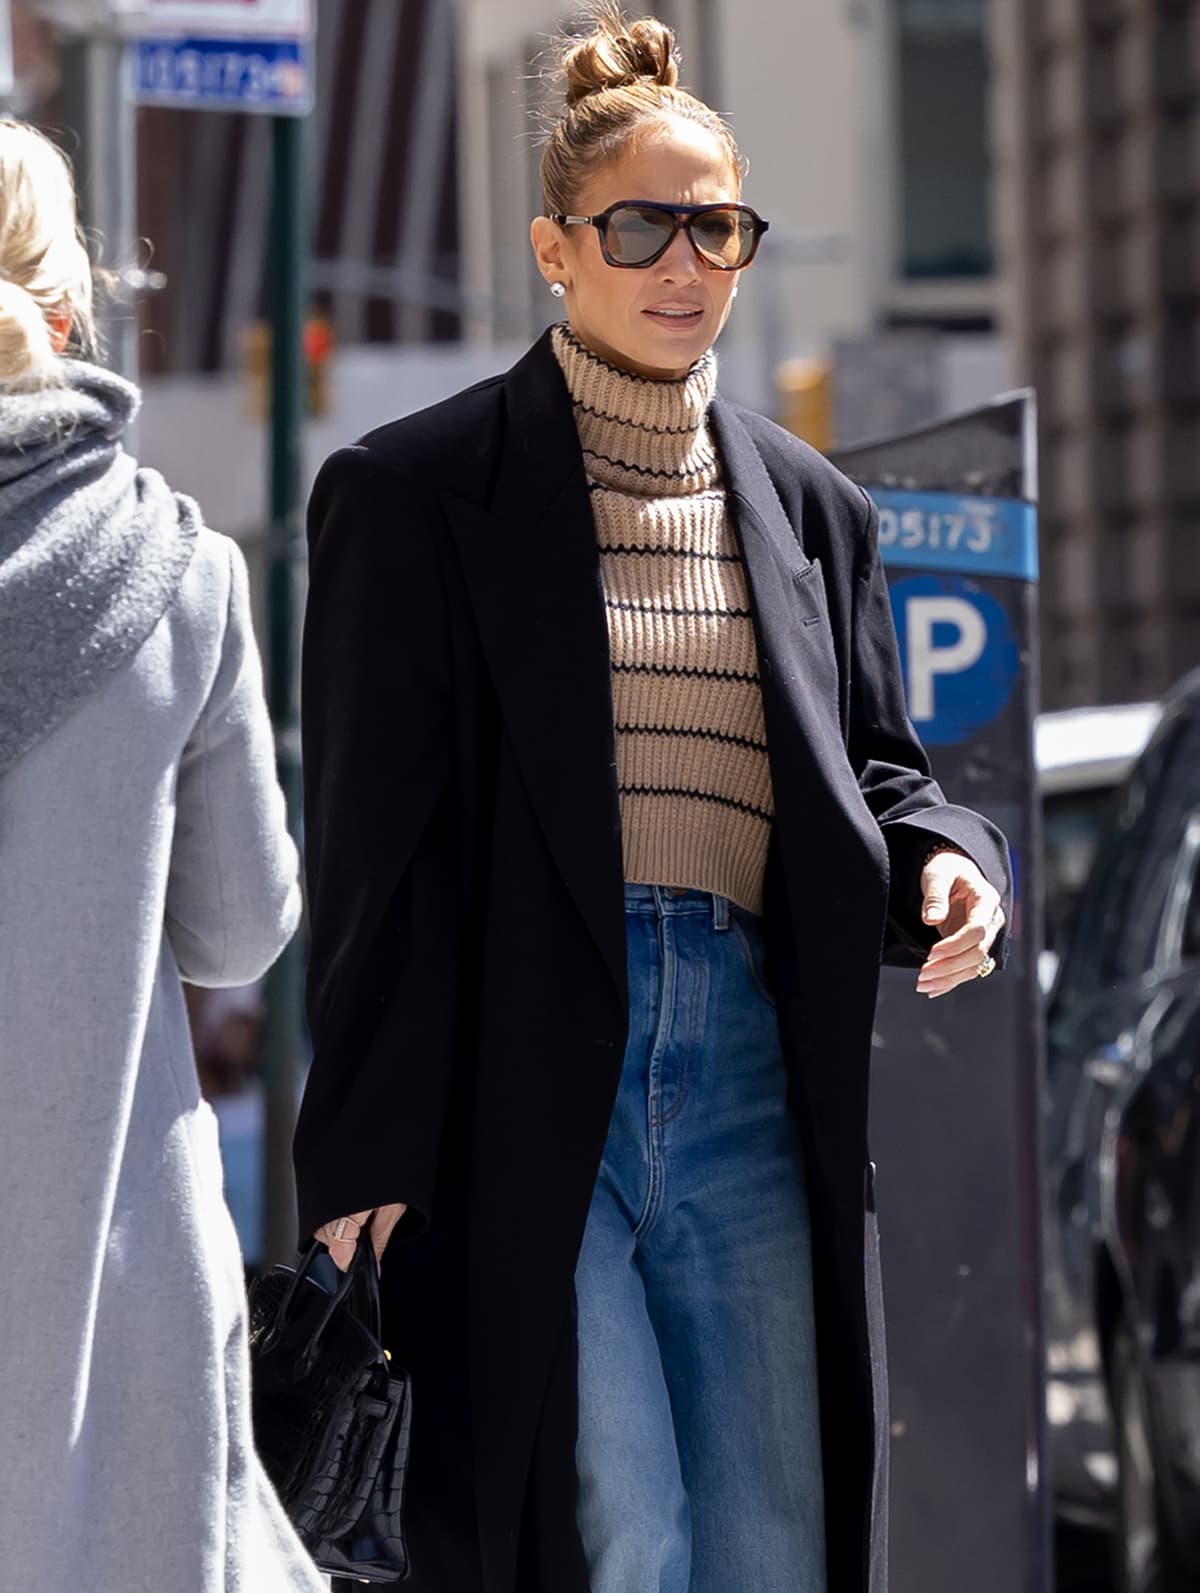 Jennifer Lopez is house-hunting in a long, black coat, striped turtleneck top, and wide-leg jeans